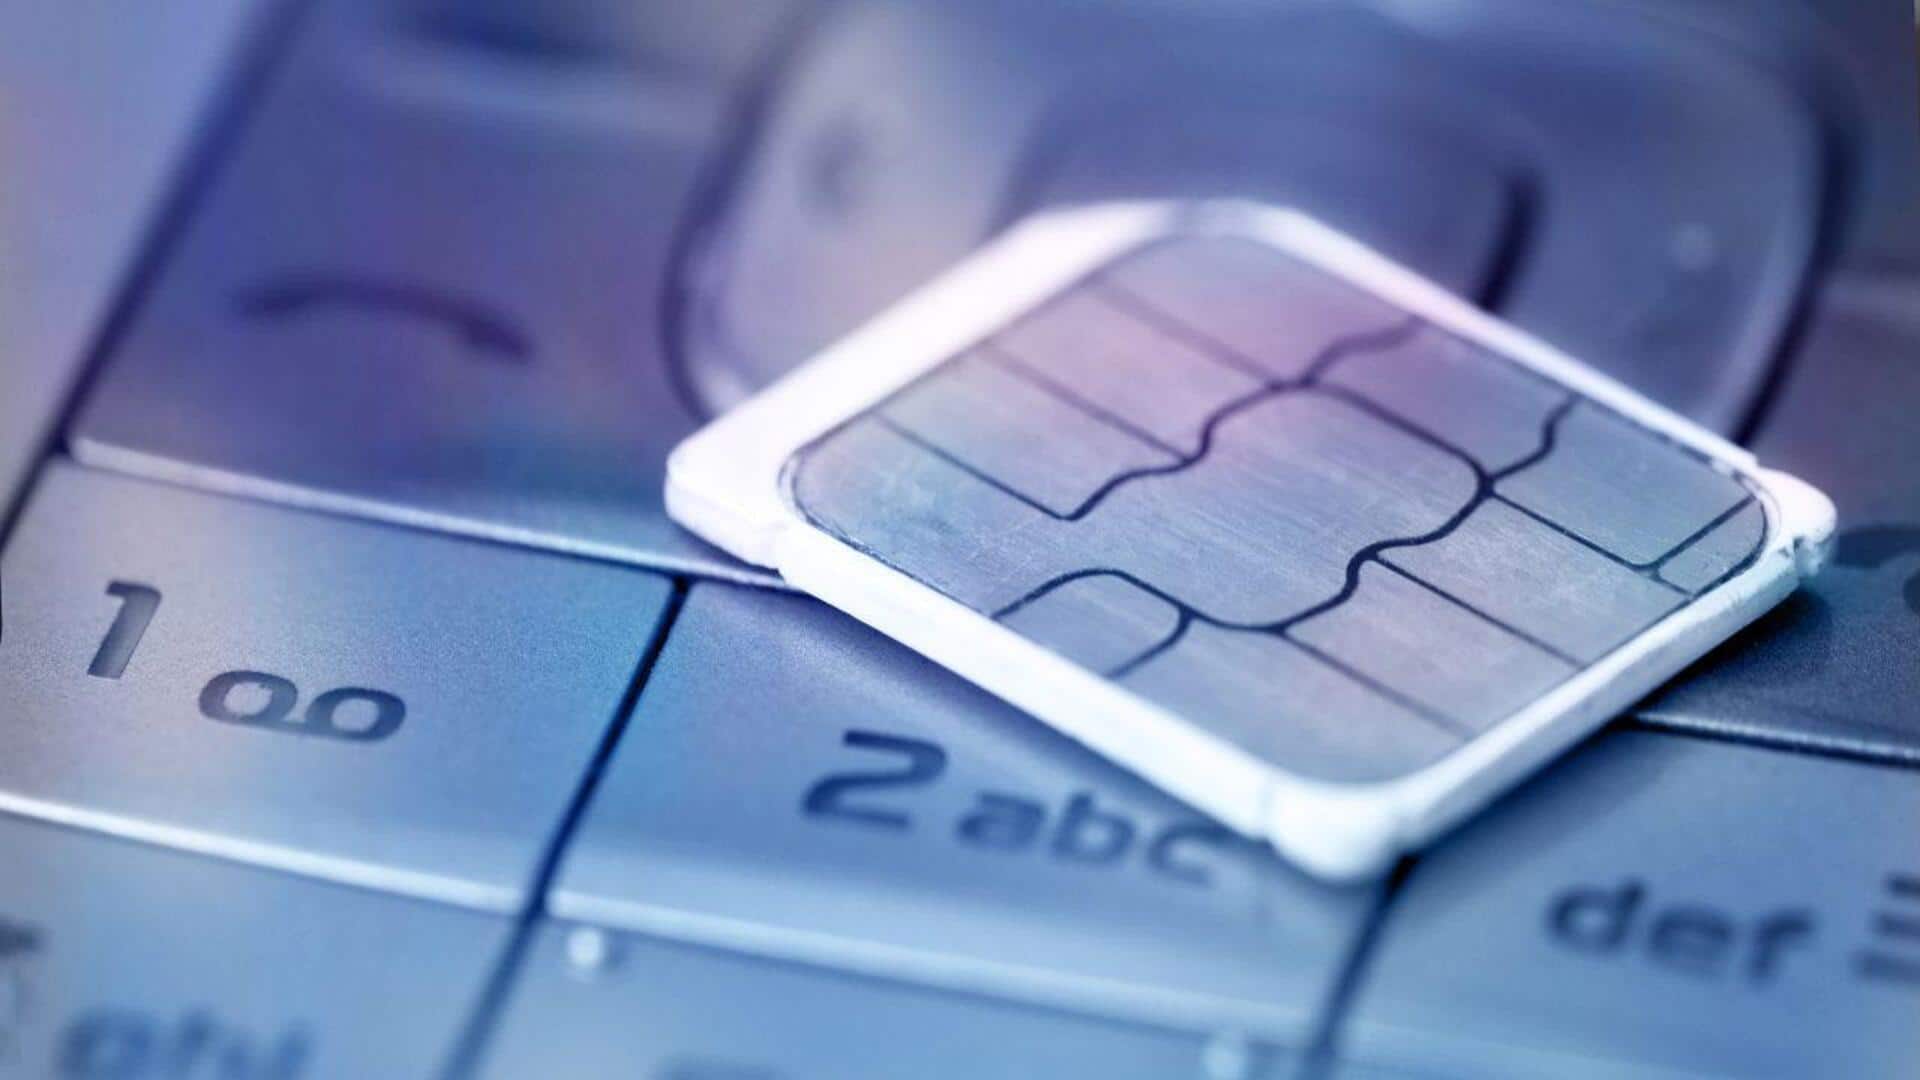 You can get SIM cards without paper-based KYC from tomorrow